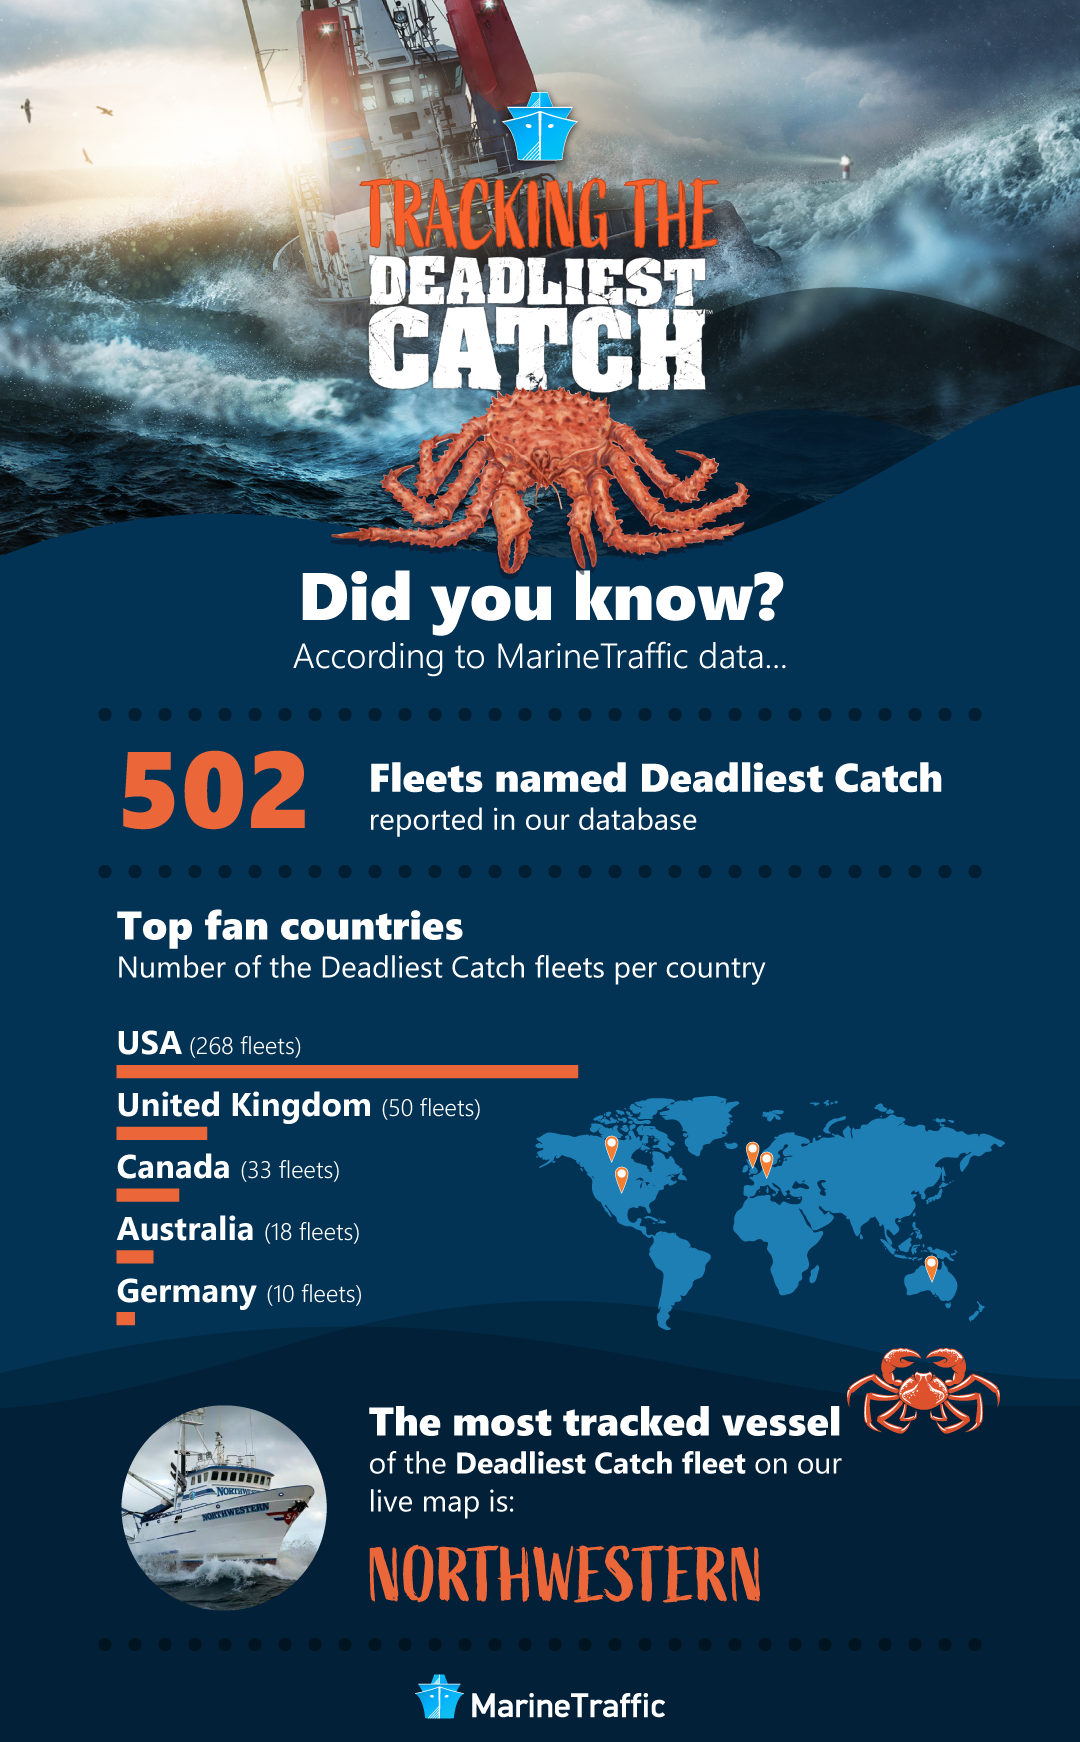 Tracking the Deadliest Catch infographic by MarineTraffic